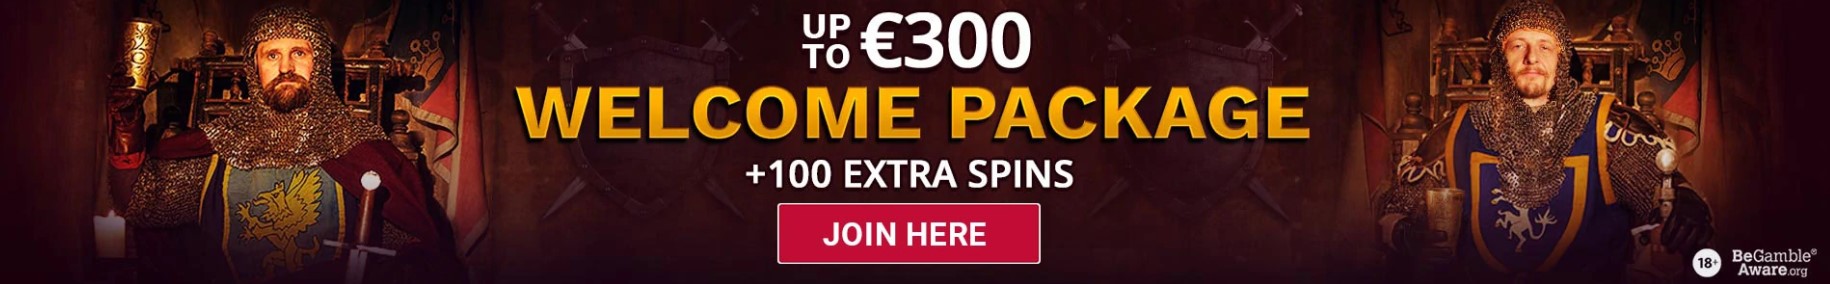 The banner promoting King Casino's generous welcome bonus of up to 300 Euro and 100 free spins, enticing new players with the opportunity to maximize their starting bankroll and enjoy a thrilling gaming experience.